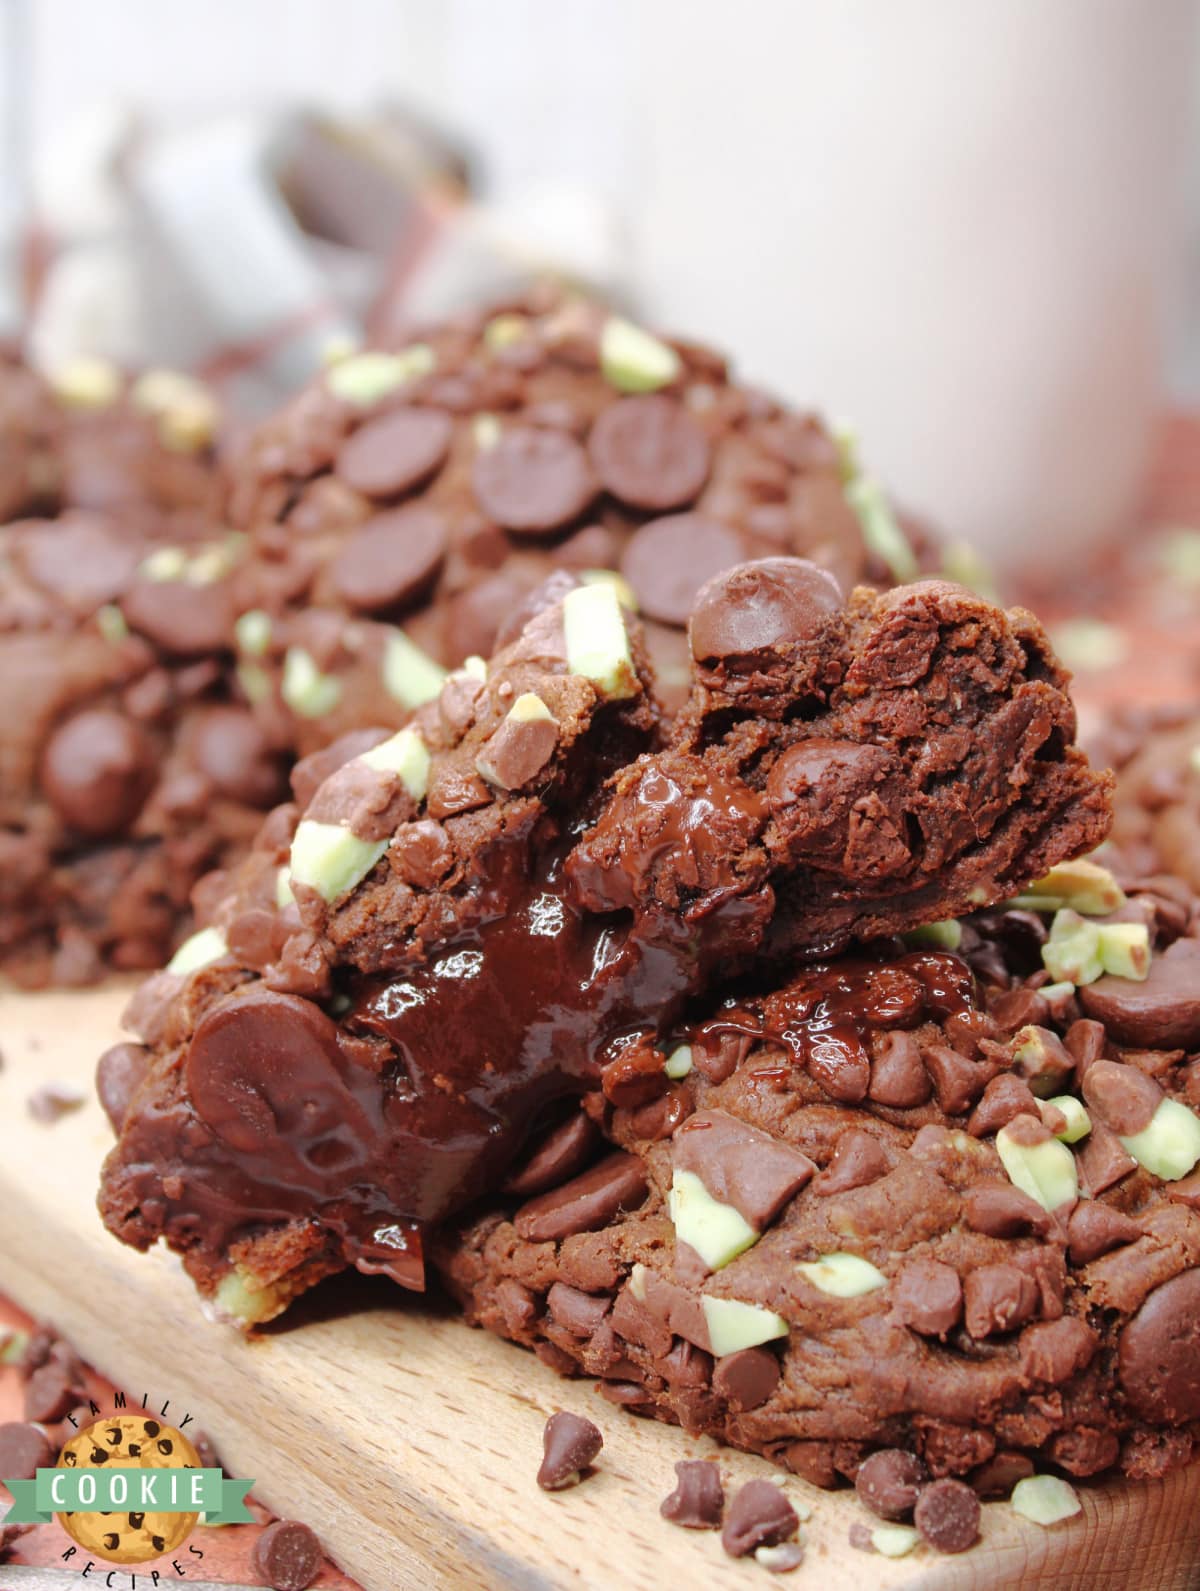 Andes Mint Stuffed Chocolate Cookies.